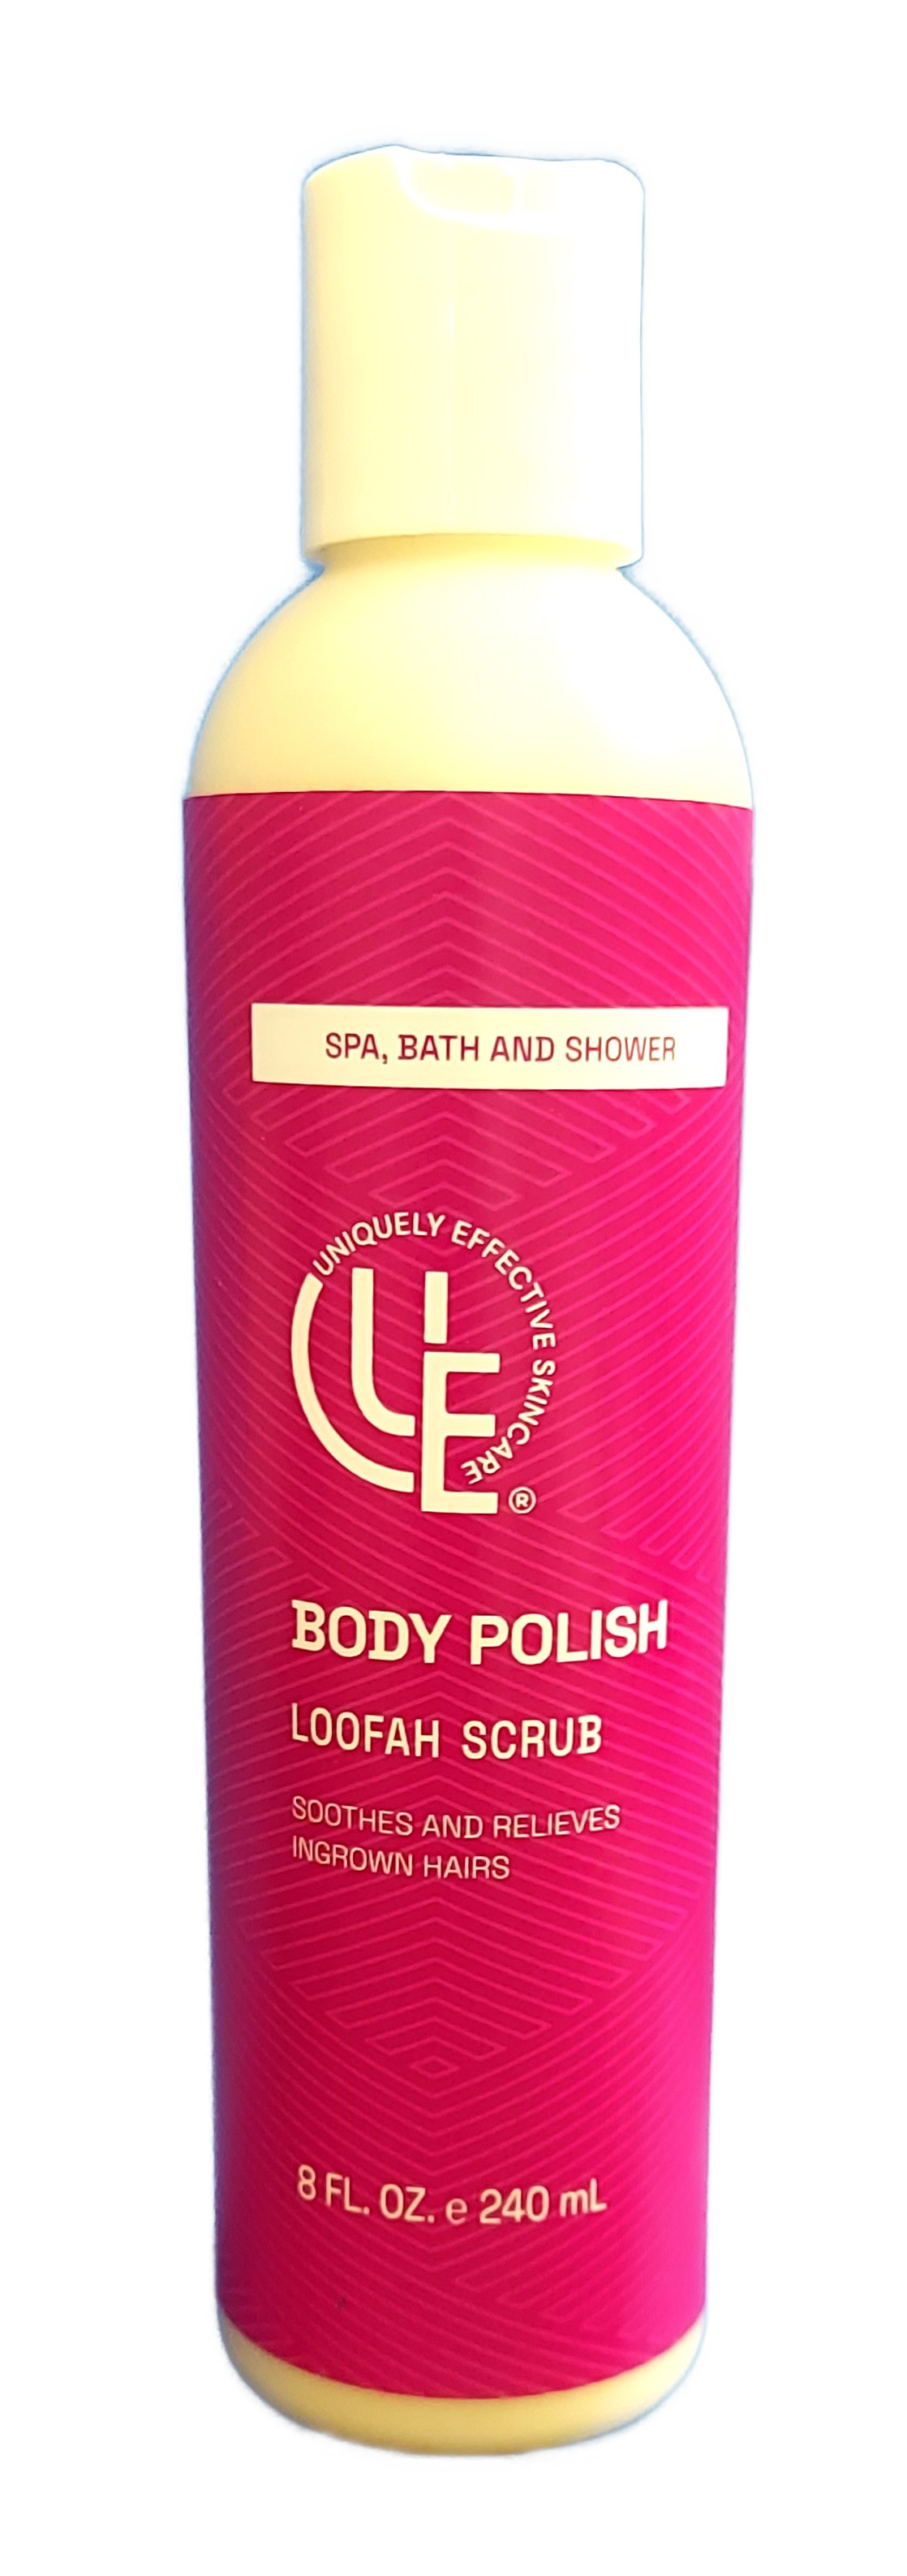 8 oz. botte of Body Polish Exfoliator for Ingrown Hairs to buff and smooth all skin types